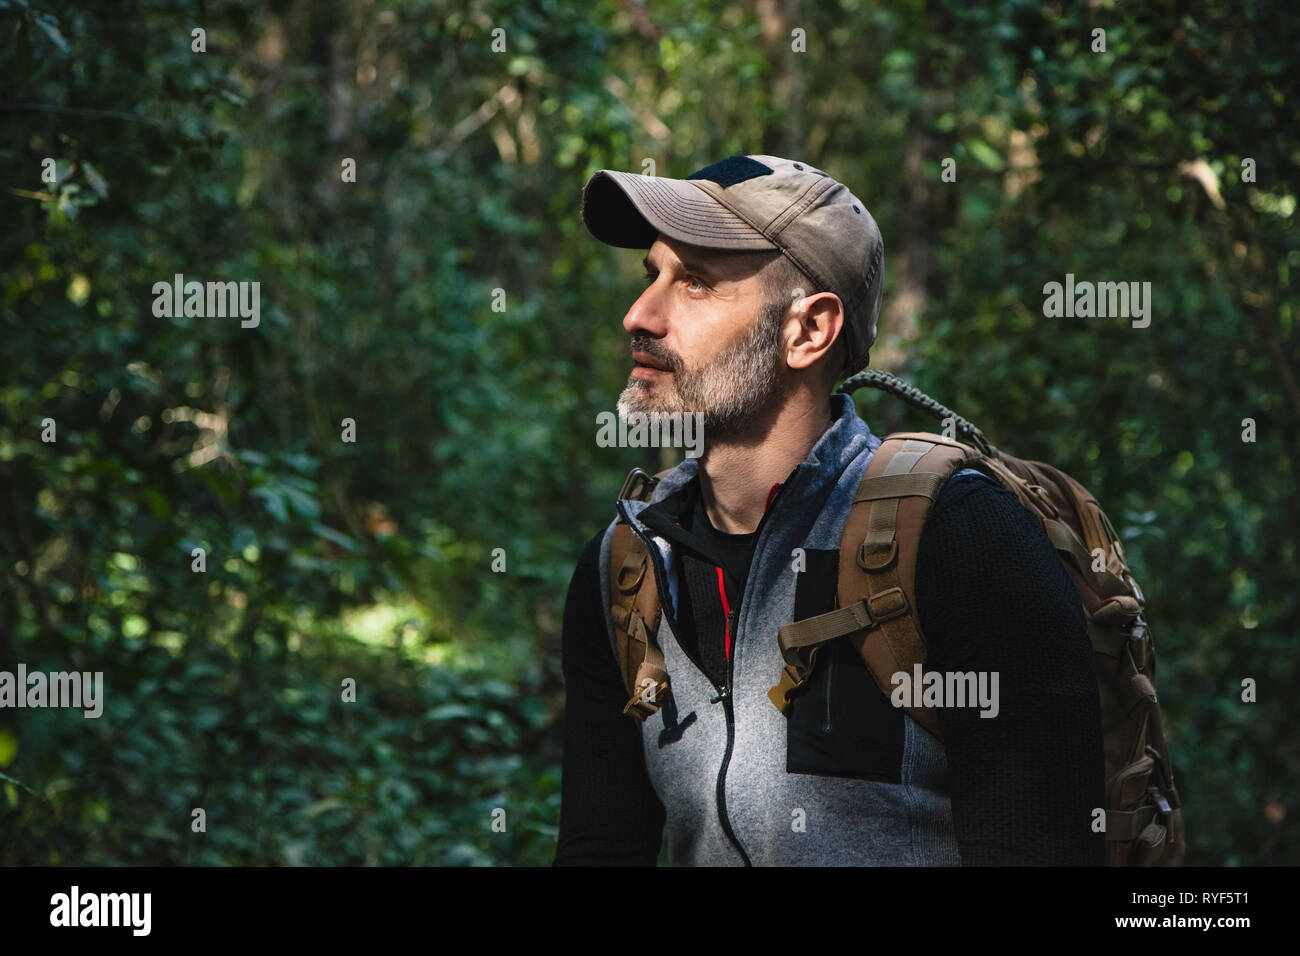 Closeup of a hiker in a wild green forest looking up to sunlight, concept nature Stock Photo